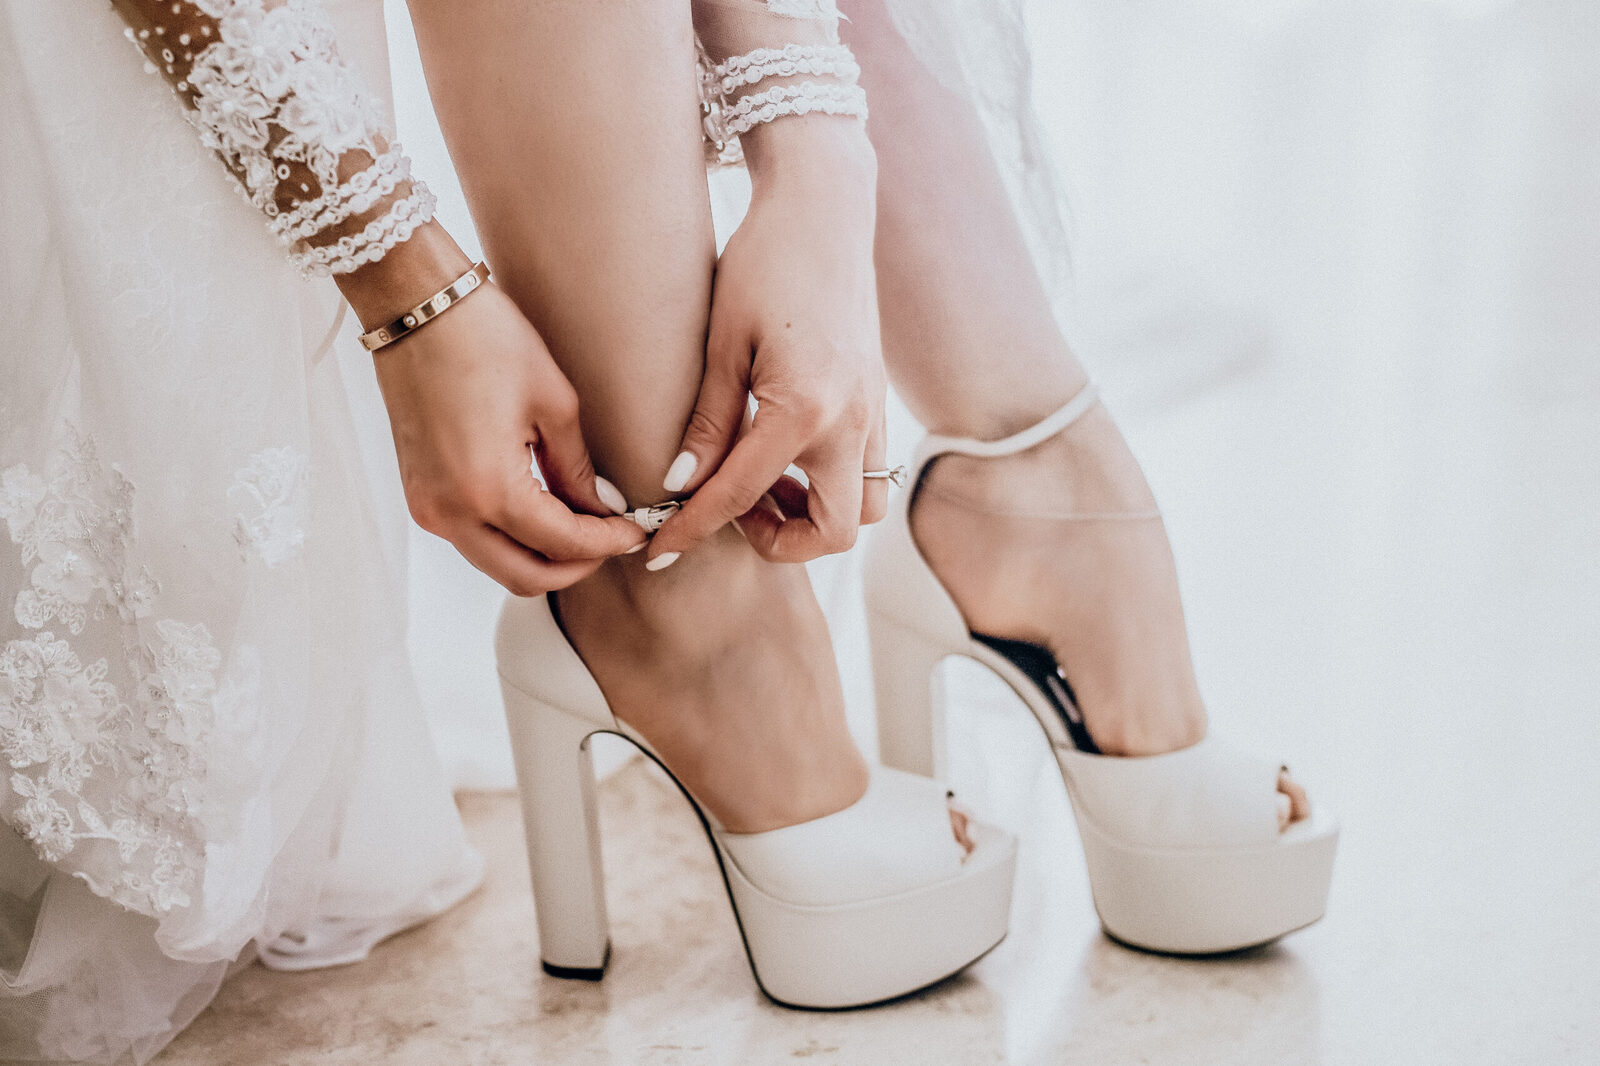 Beautiful Bride Getting Ready during a wedding videography session in Mexico | Bridal Accessories & Wedding Shoes | Video de Boda